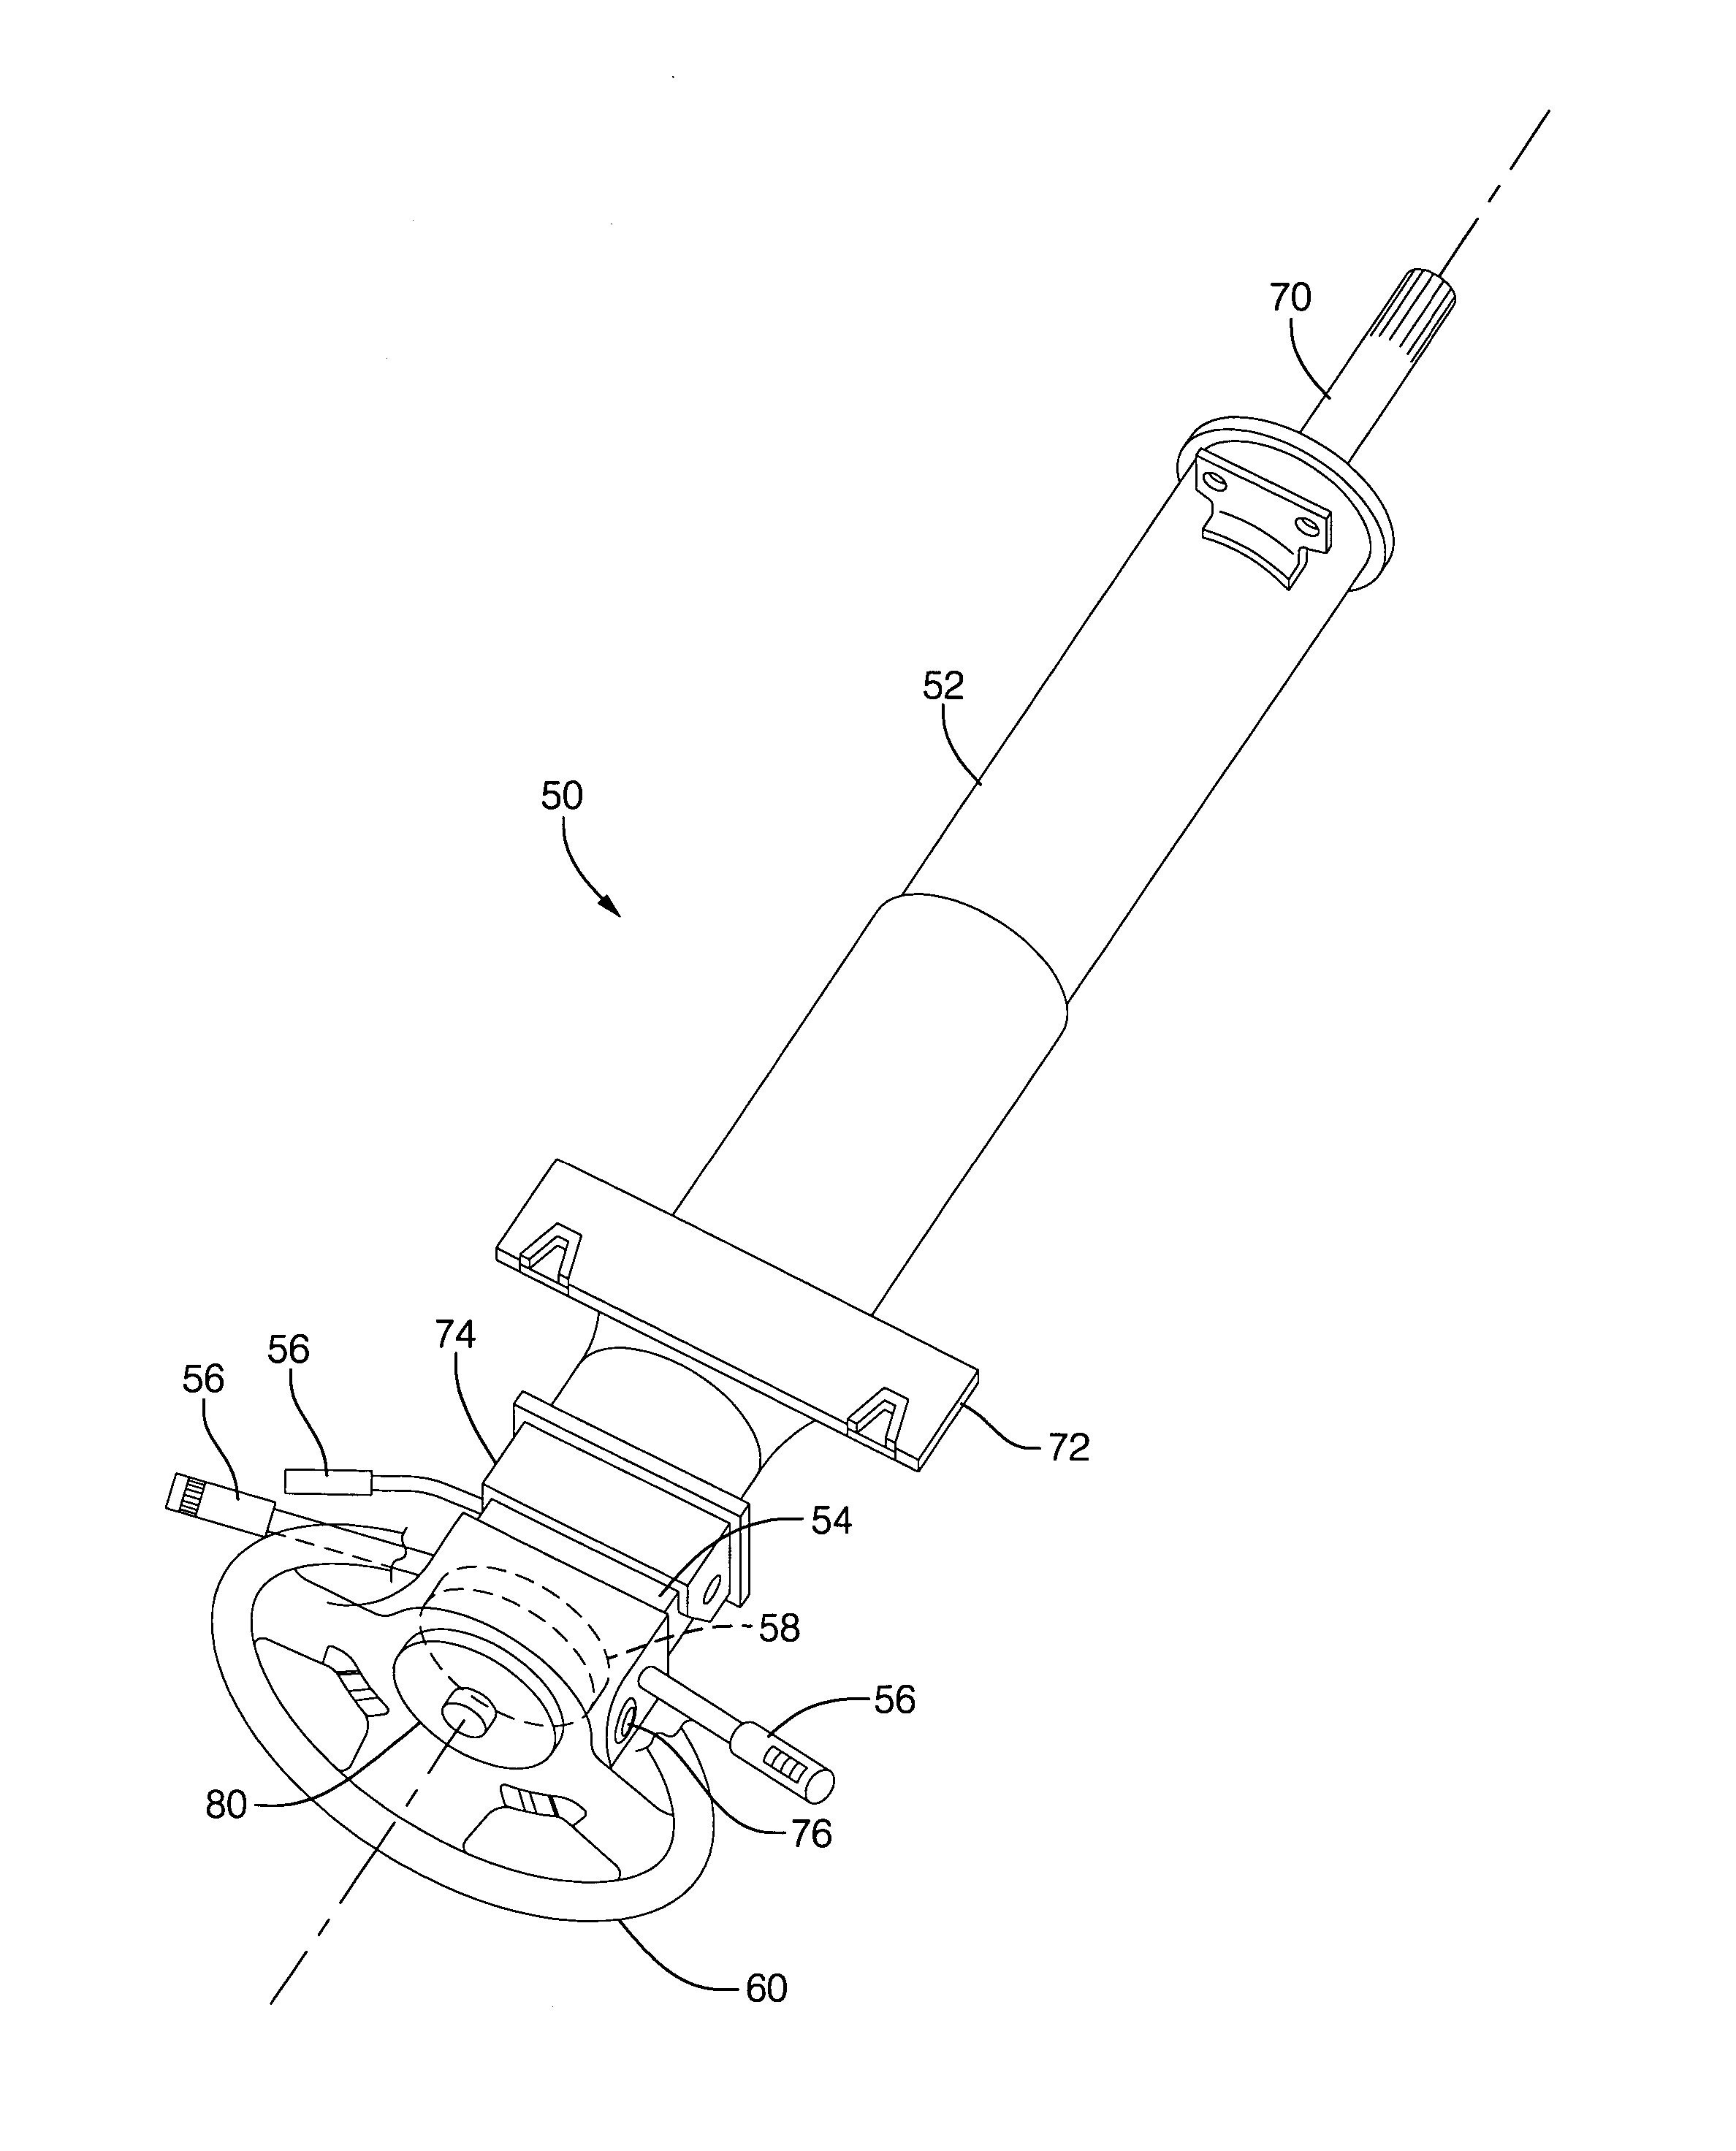 Multiplex signal system for vehicle steering column assembly